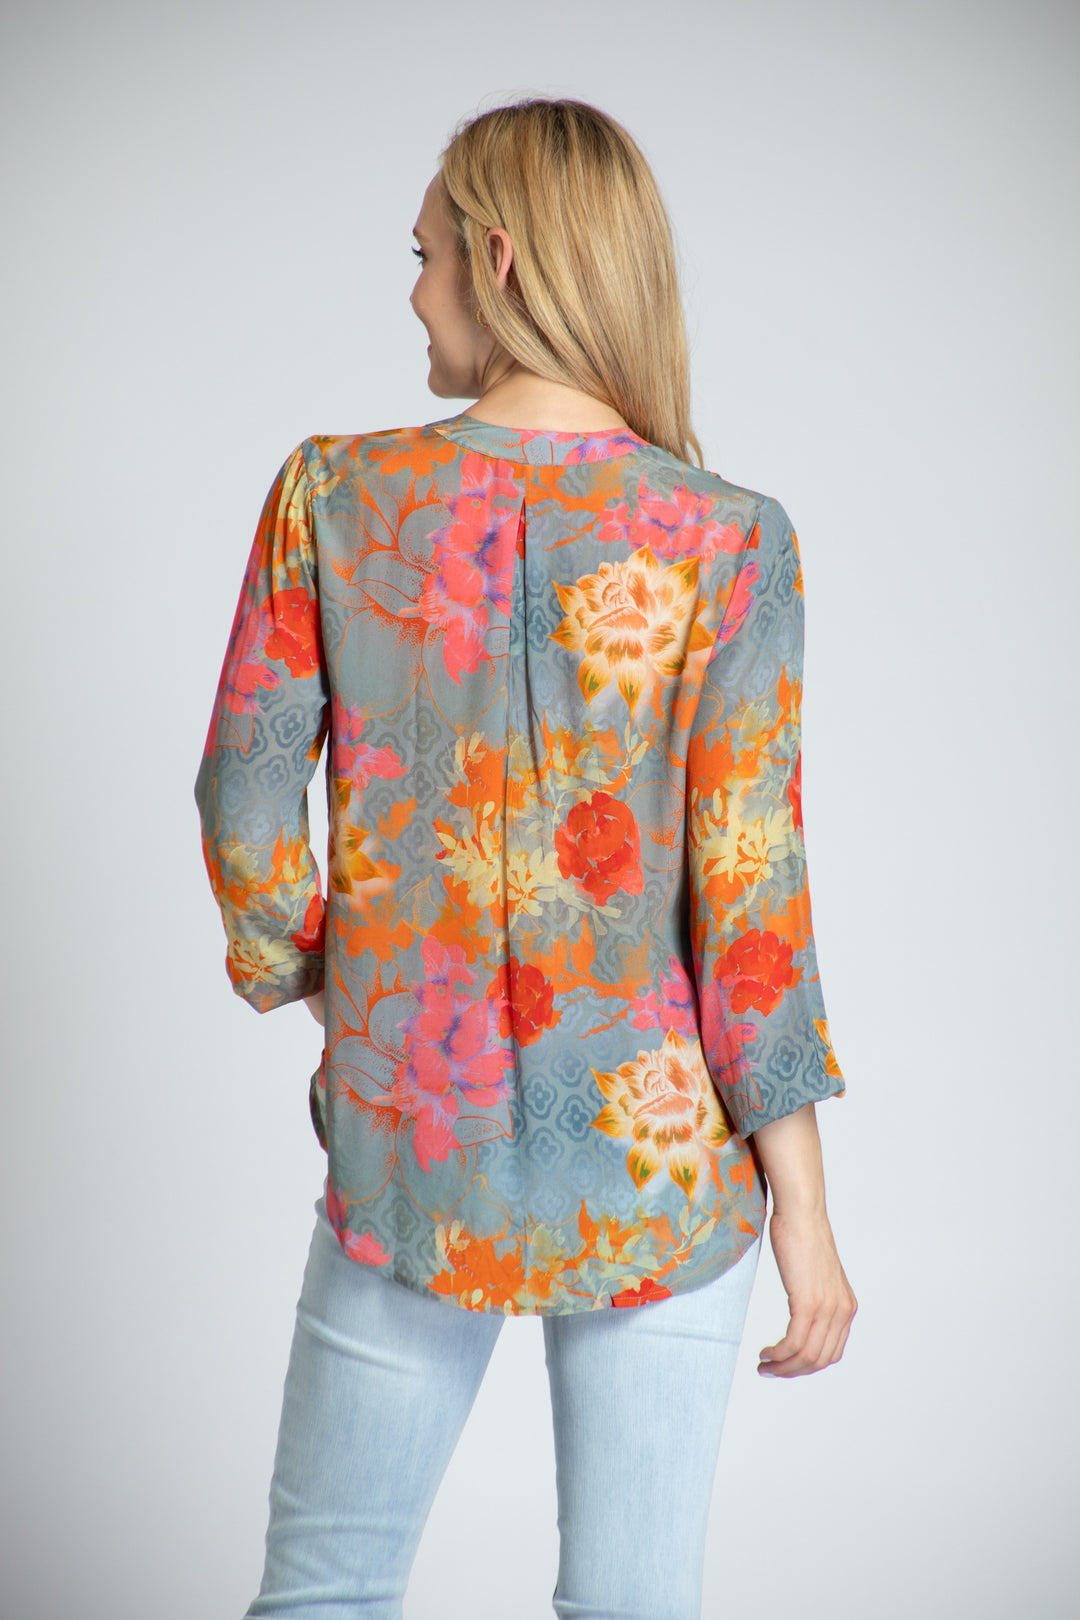 Printed Crossover Top in Gray Floral